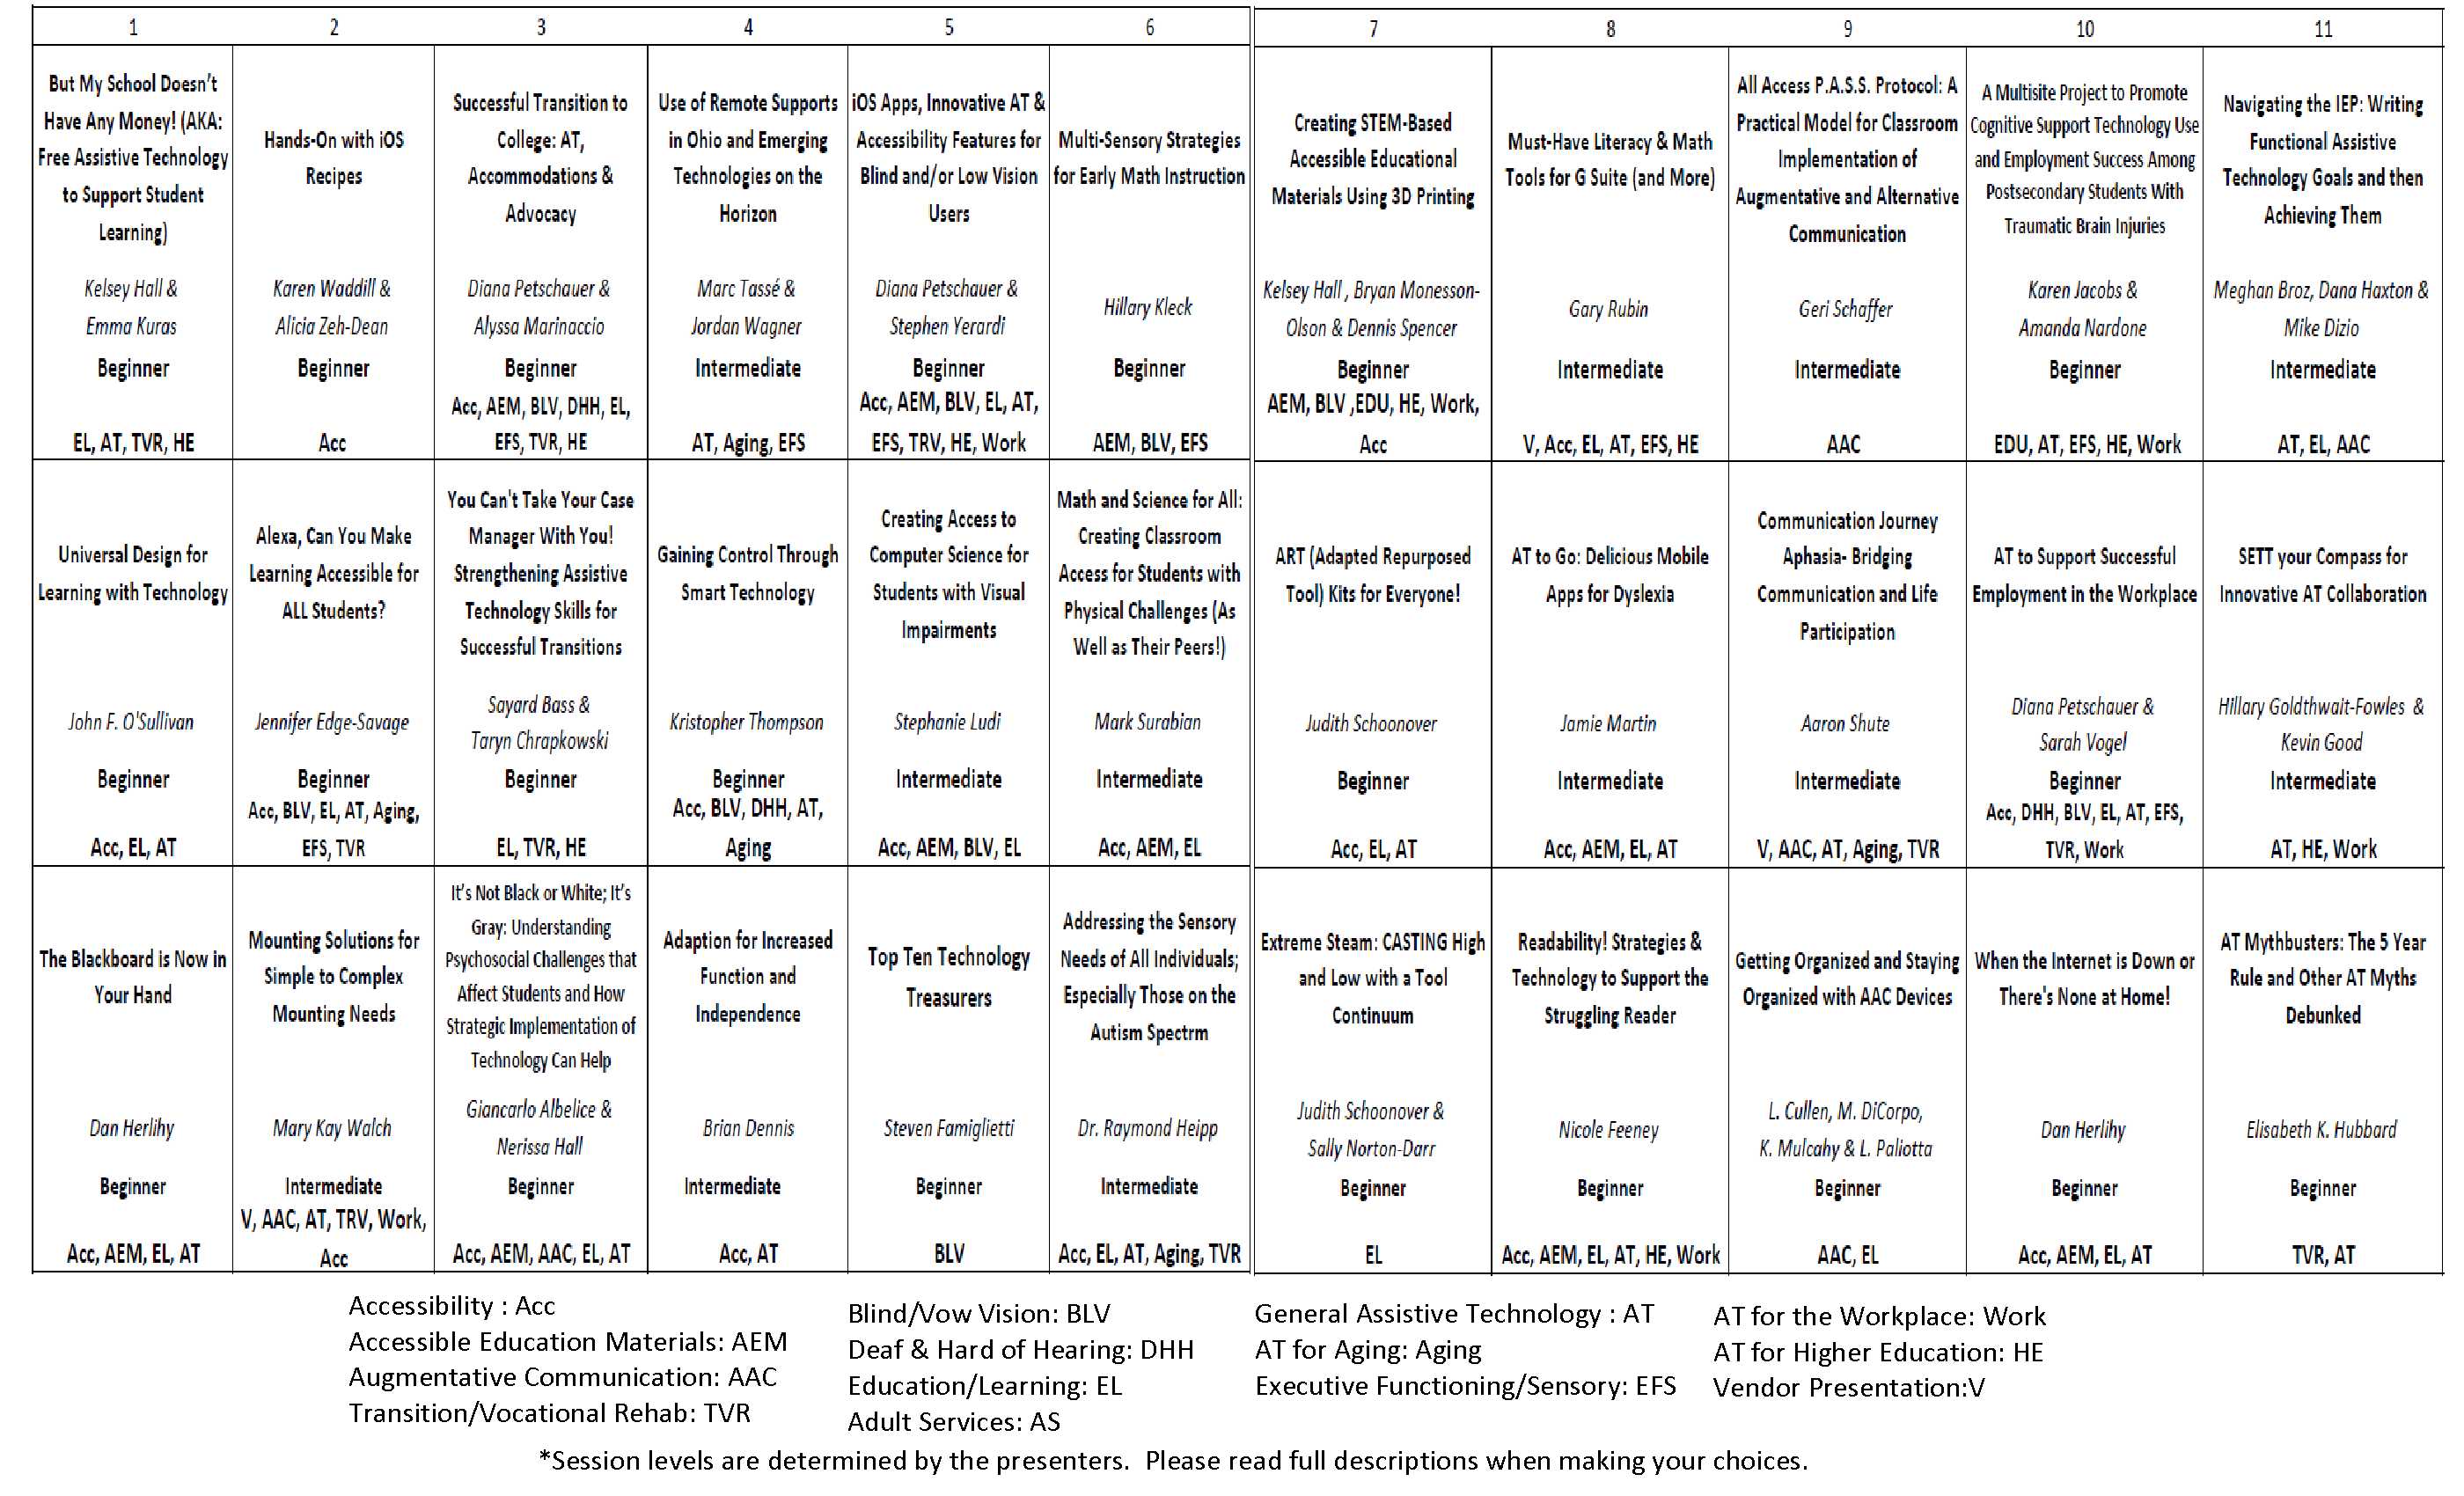 This is a grid that shows all of the presentation sessions for November 30th